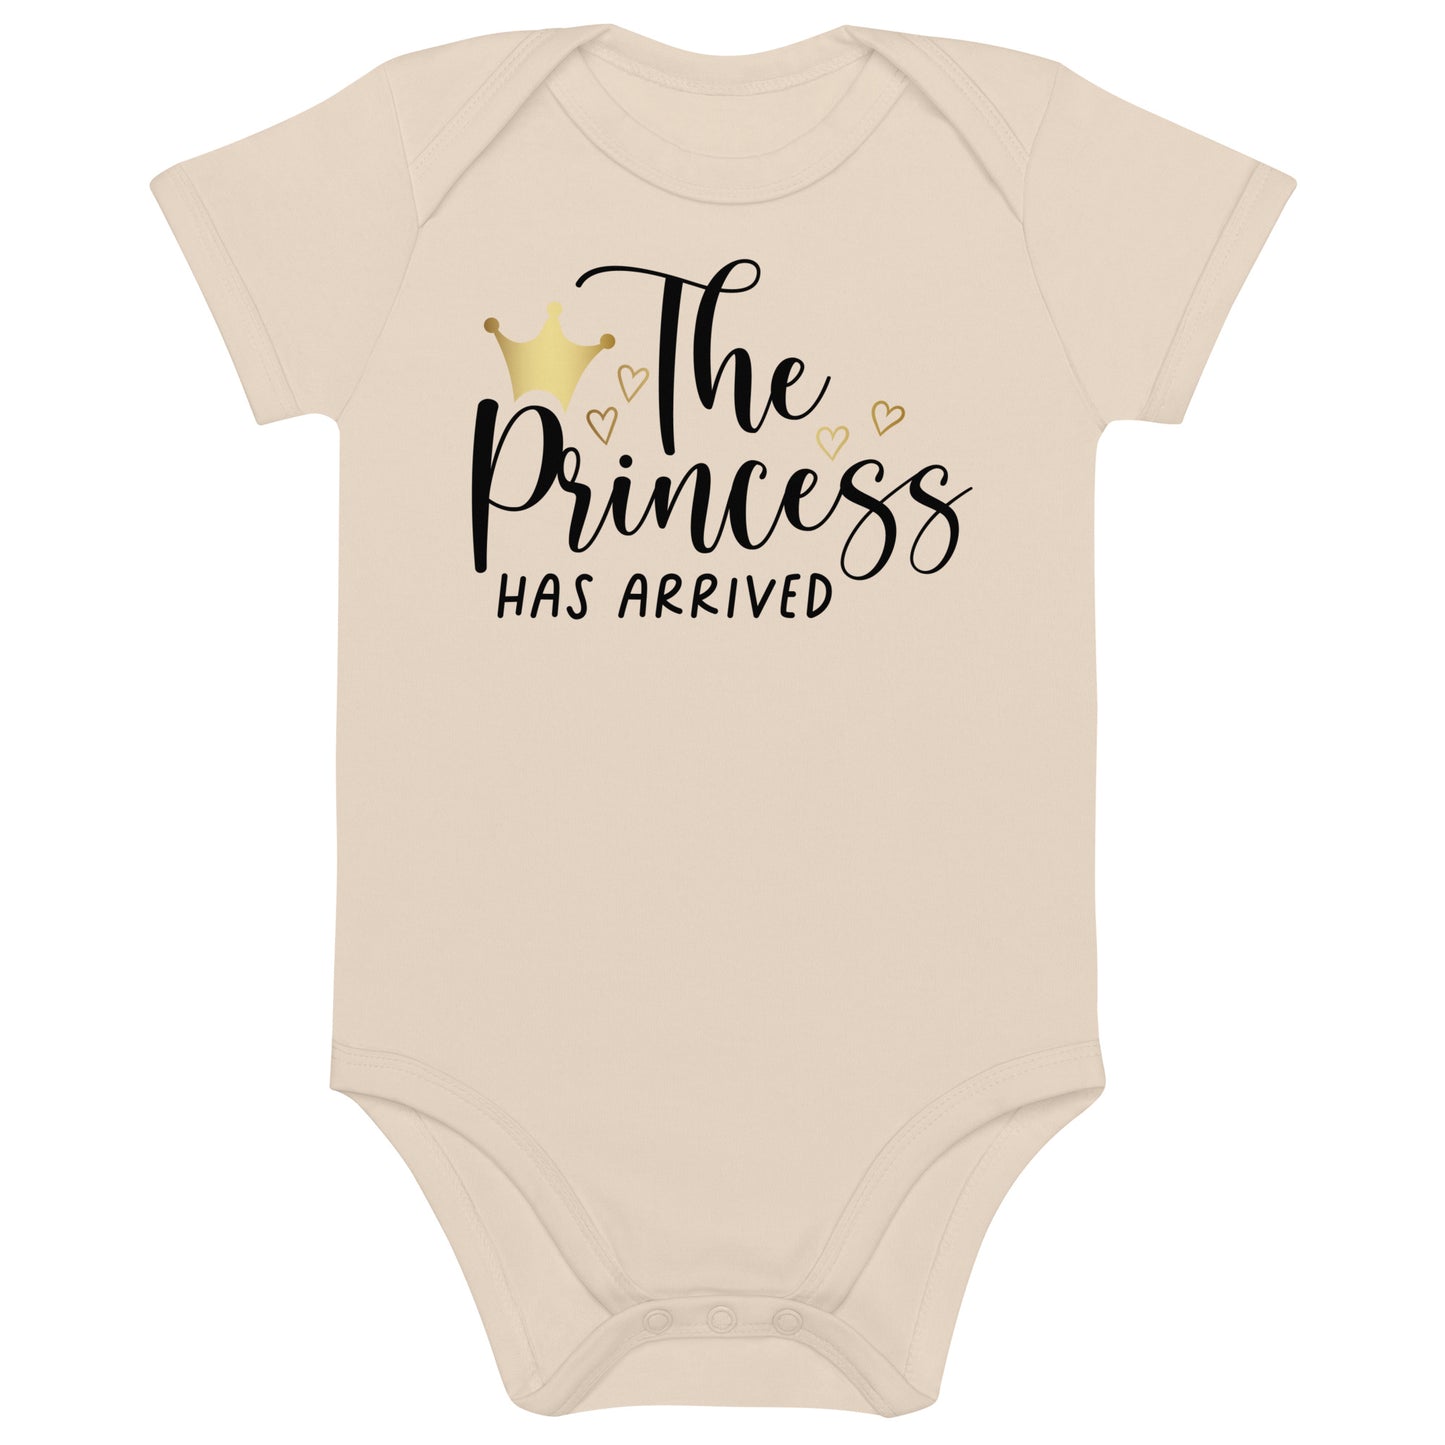 Organic cotton baby bodysuit - The Princess Has Arrived